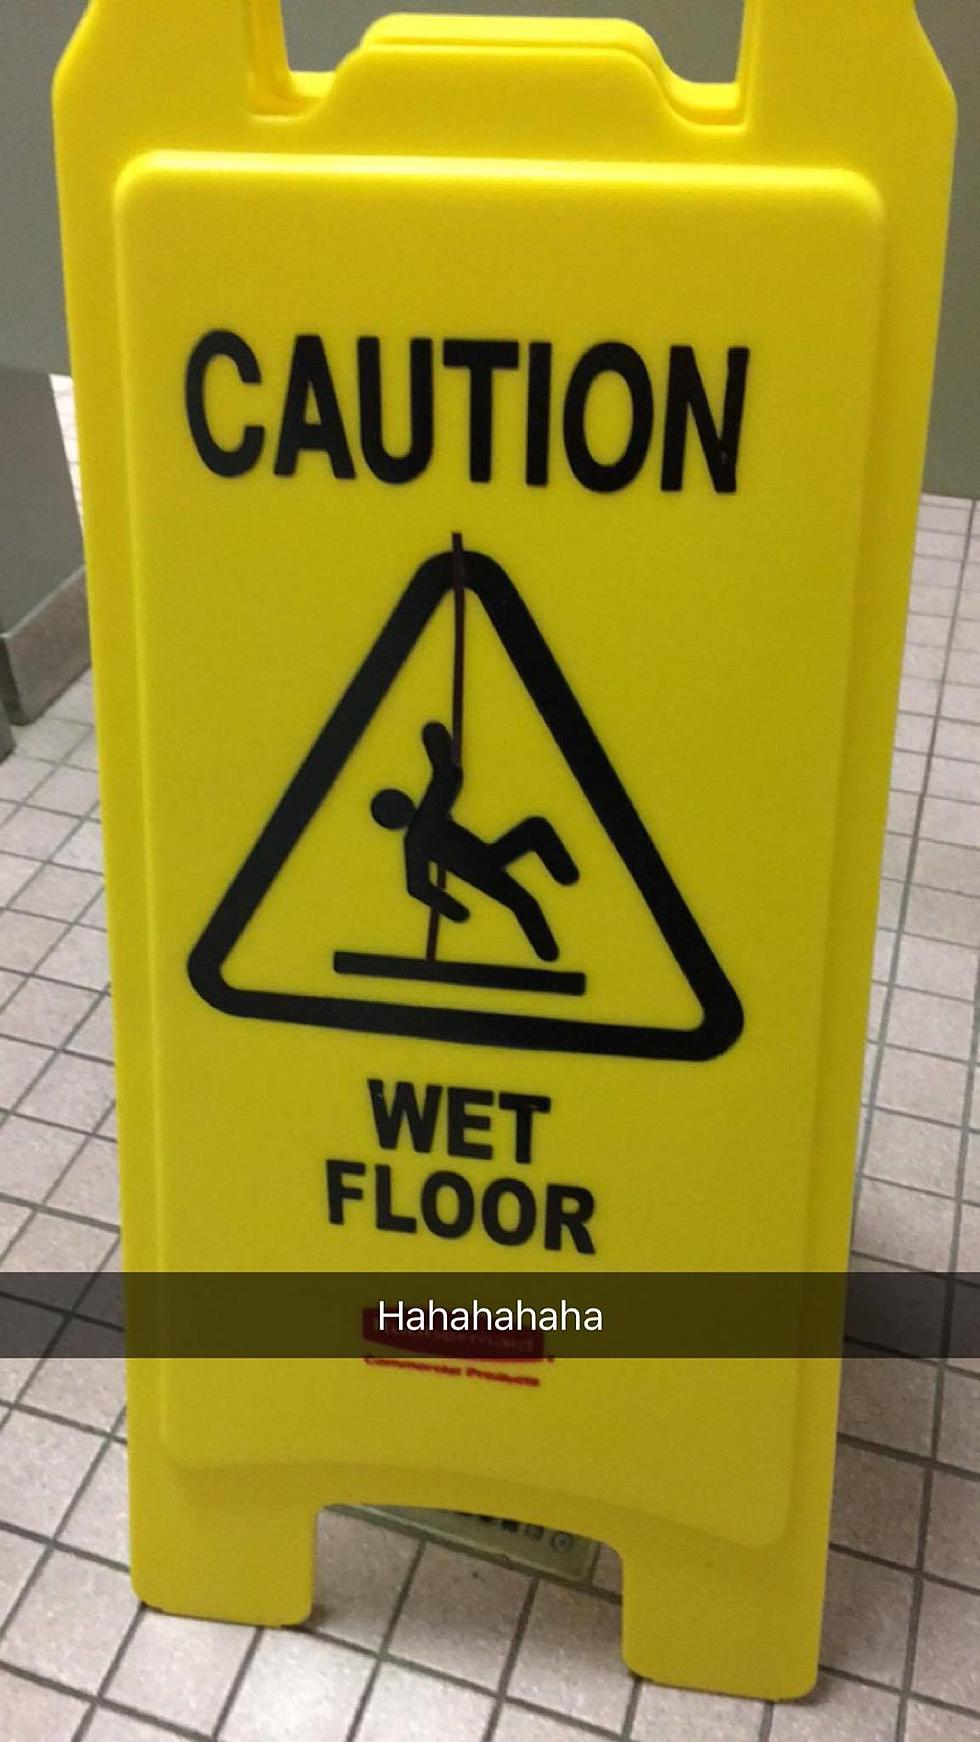 How to Make Caution Signs More Entertaining [PHOTO]